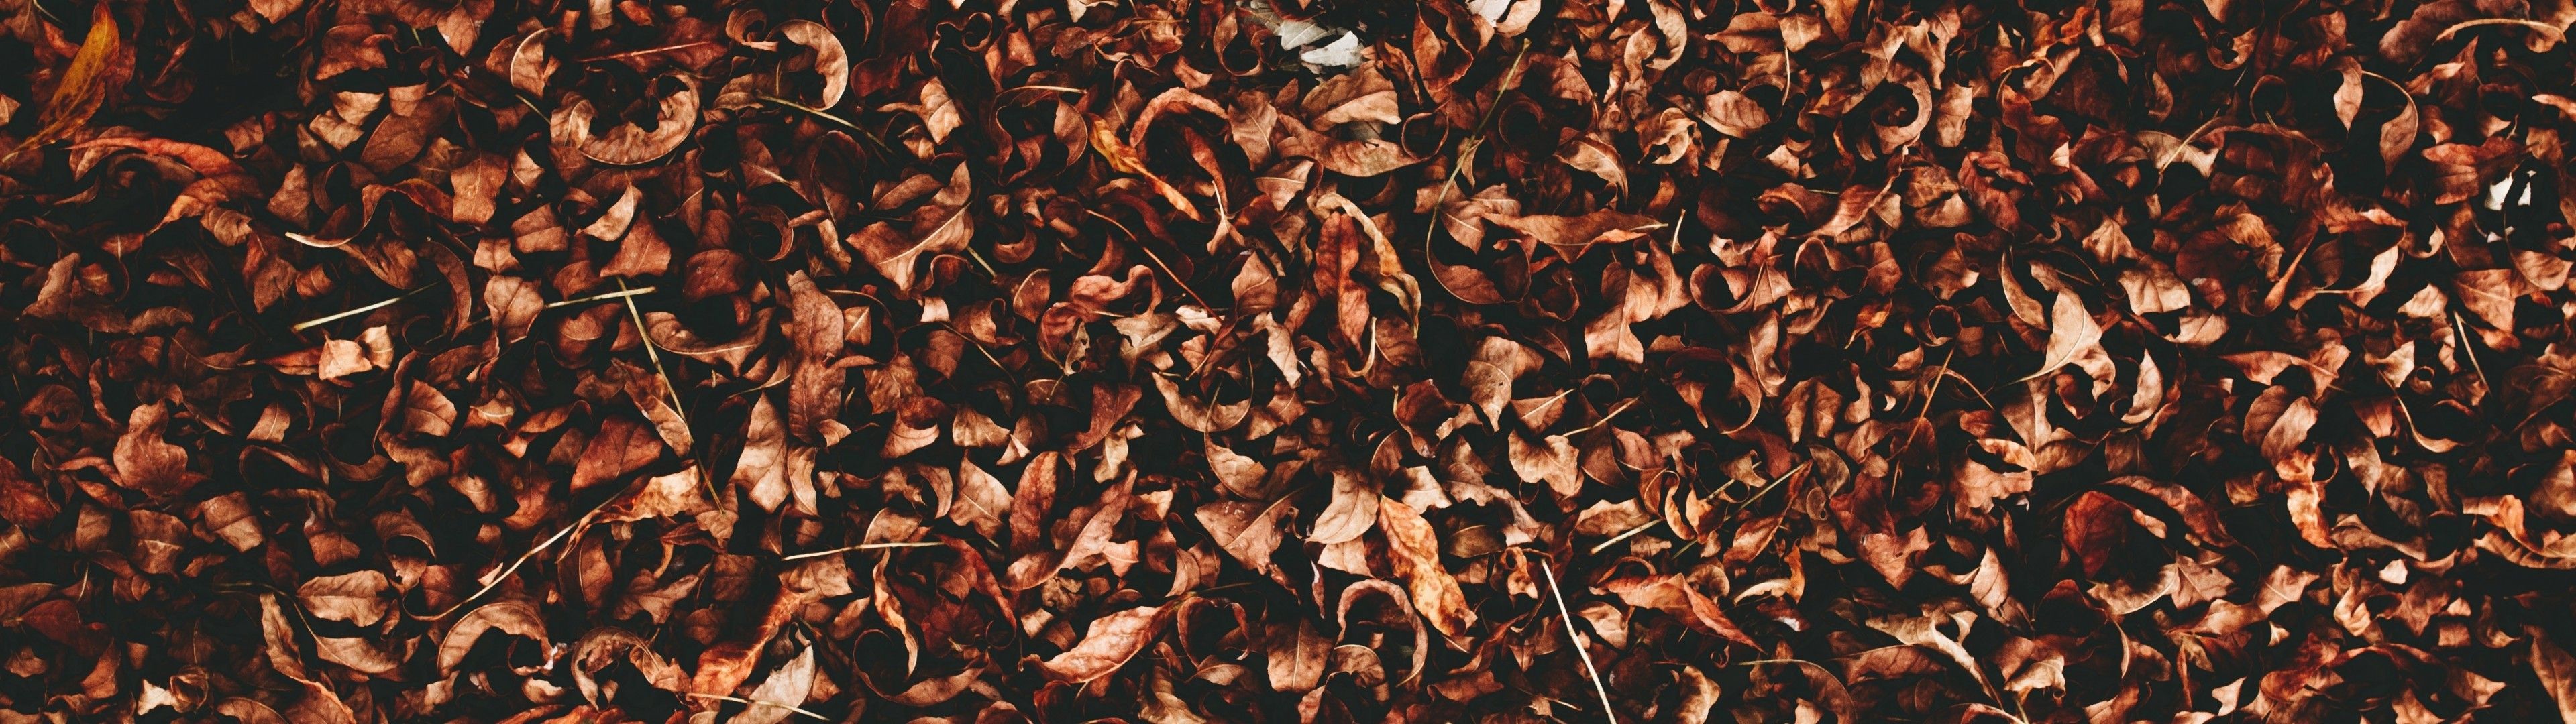 Download 3840x1080 Dry Leaves, Foliage, Autumn Wallpaper